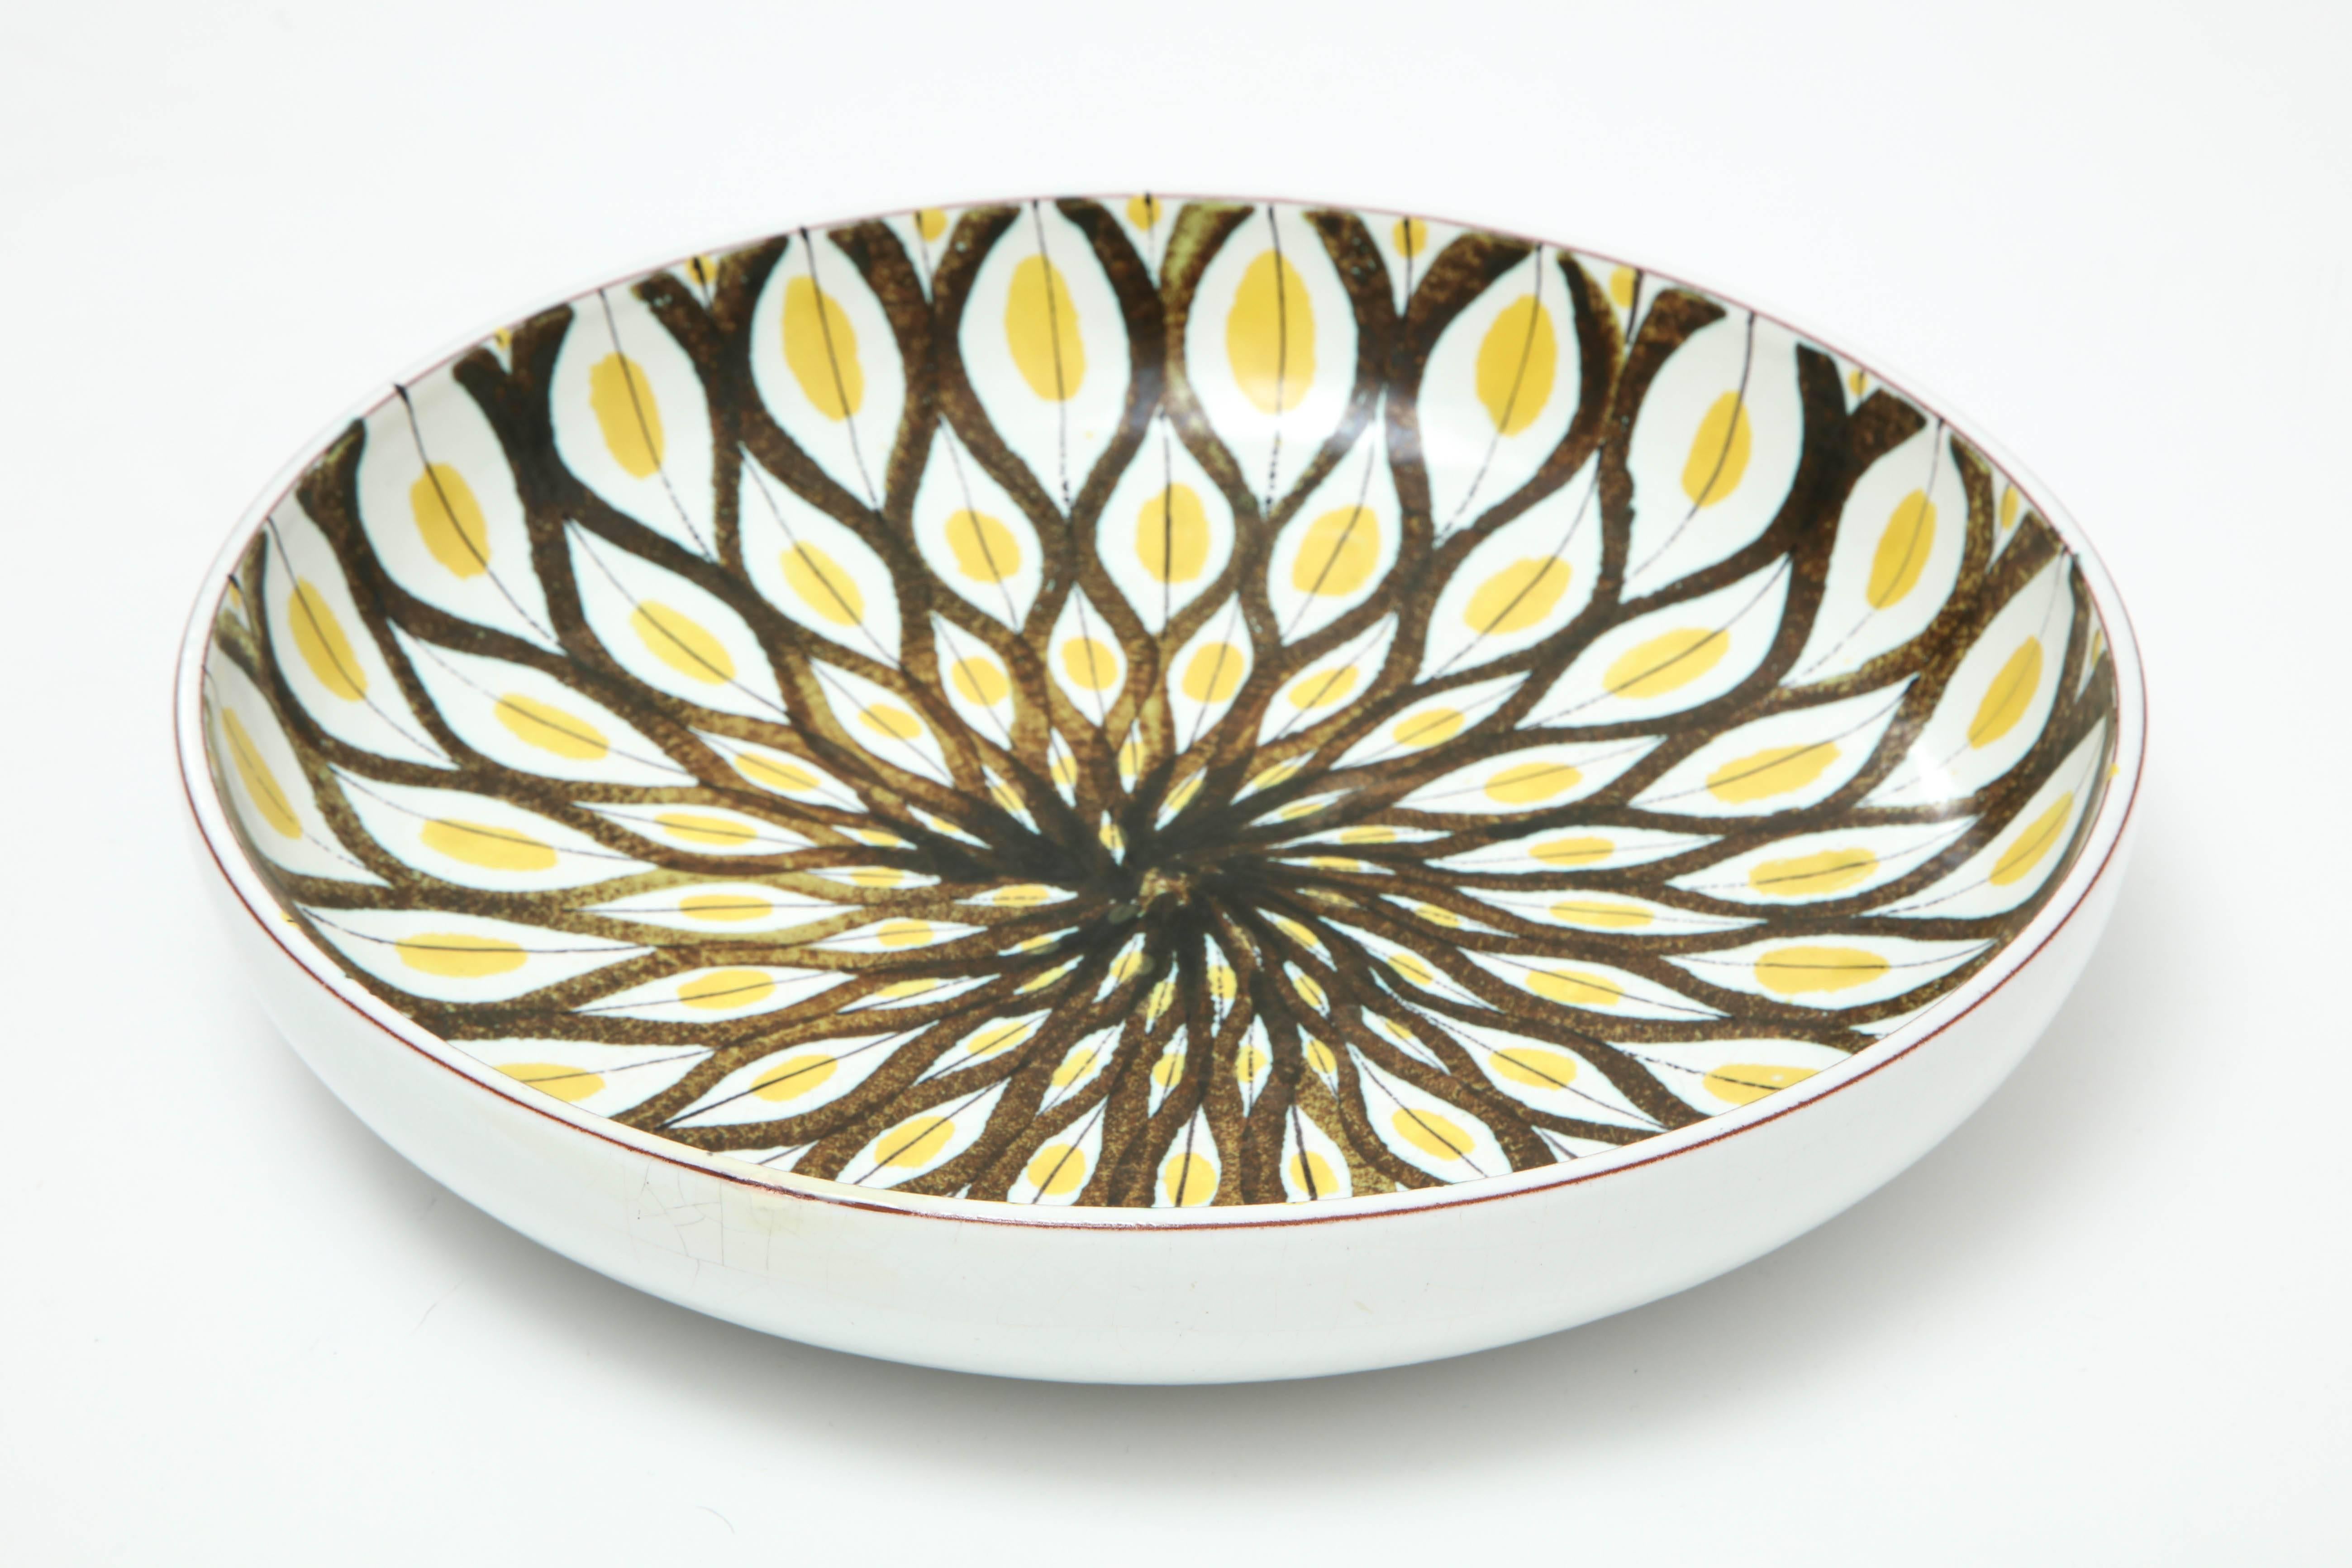 Decorative, large faience bowl by Stig Lindberg, Sweden, circa 1950. Made by Gustavsberg factory.